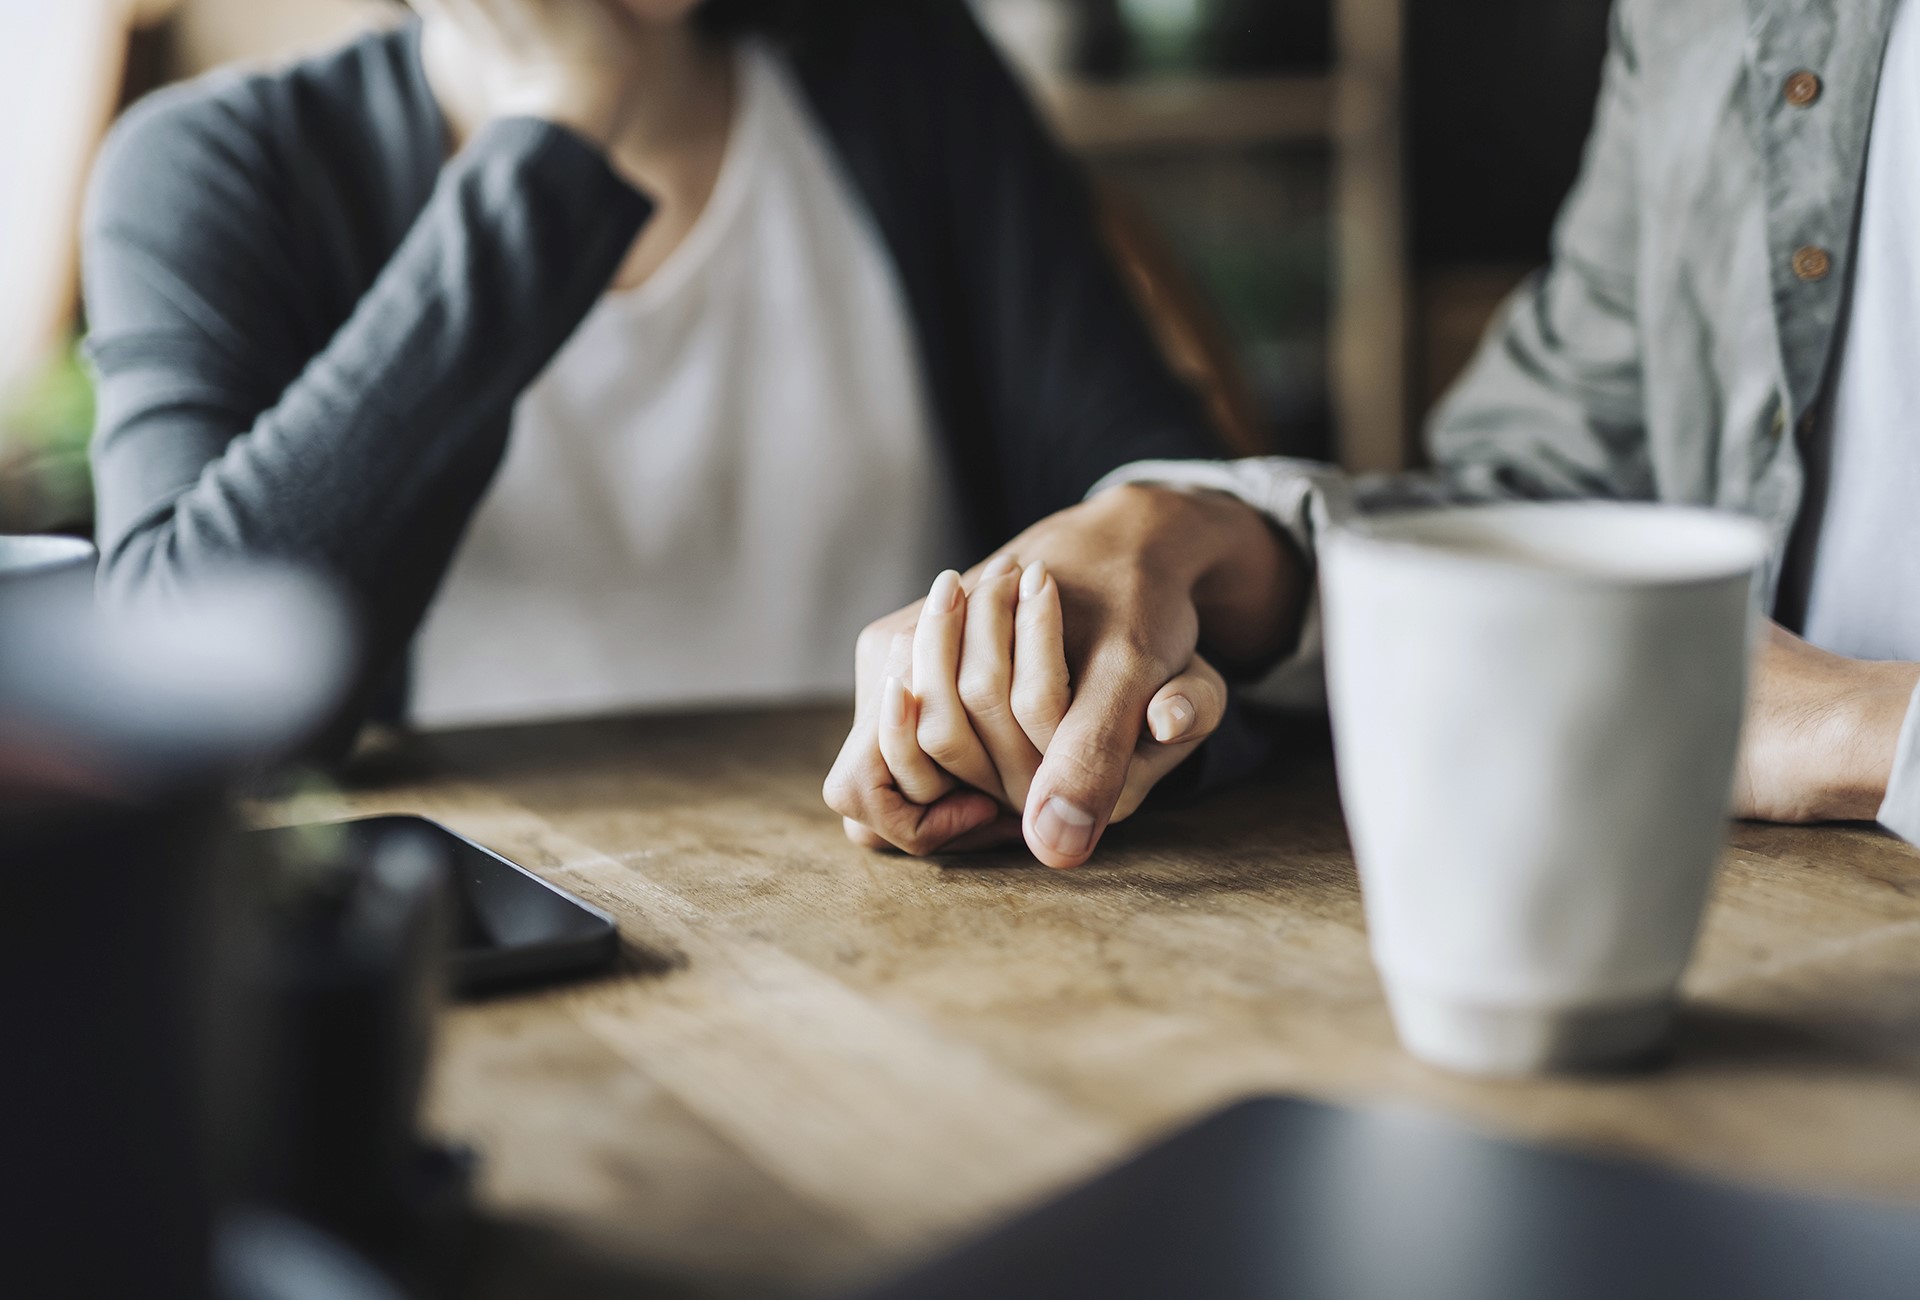 Planning ahead to support your partner